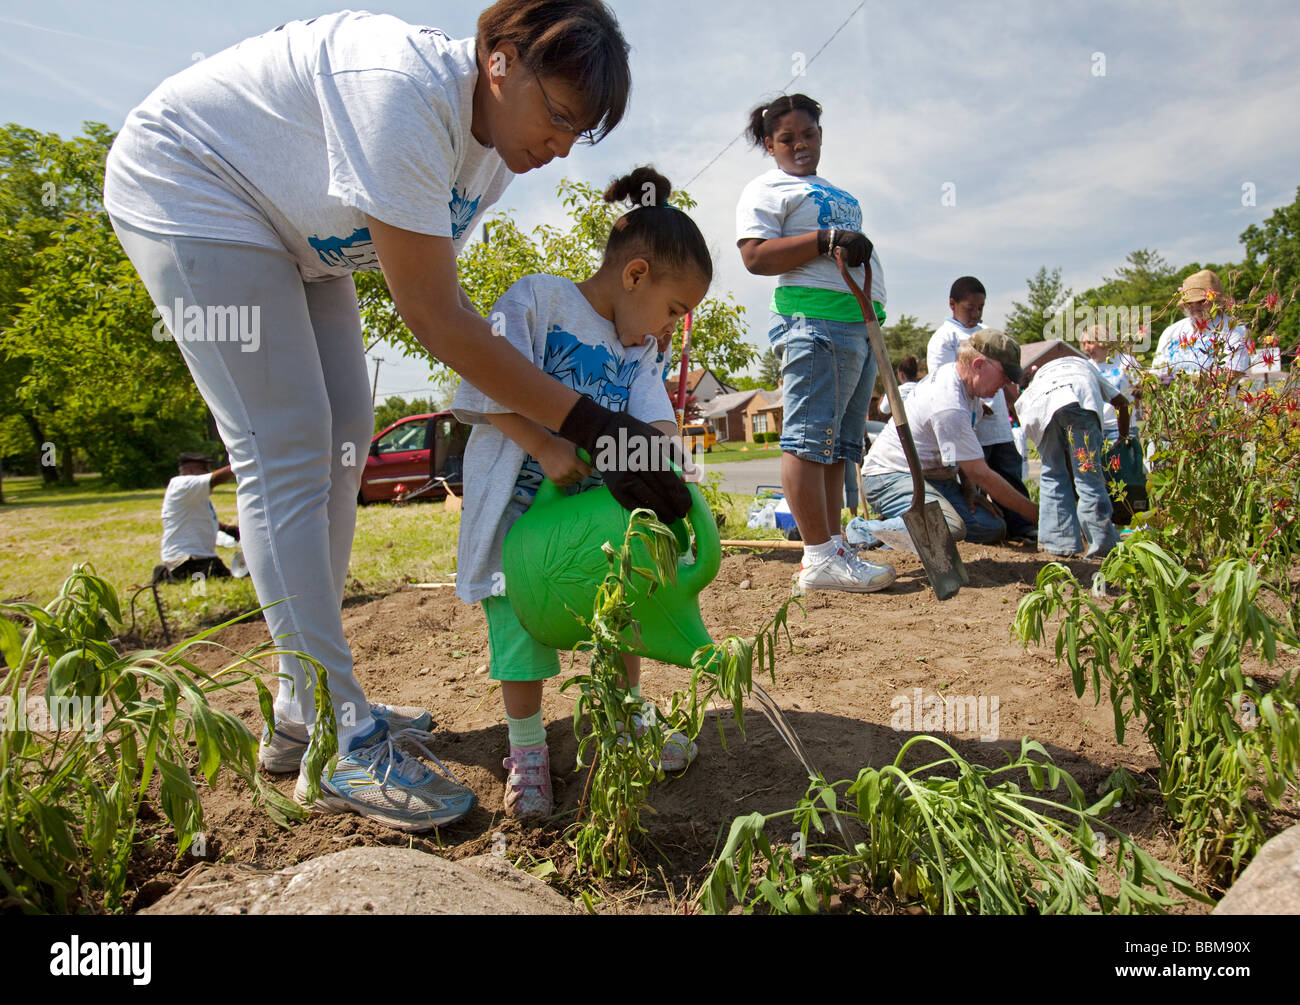 Detroit Michigan A mother helps her young child water plants planted by volunteers in Rouge Park as part of a park cleanup Stock Photo